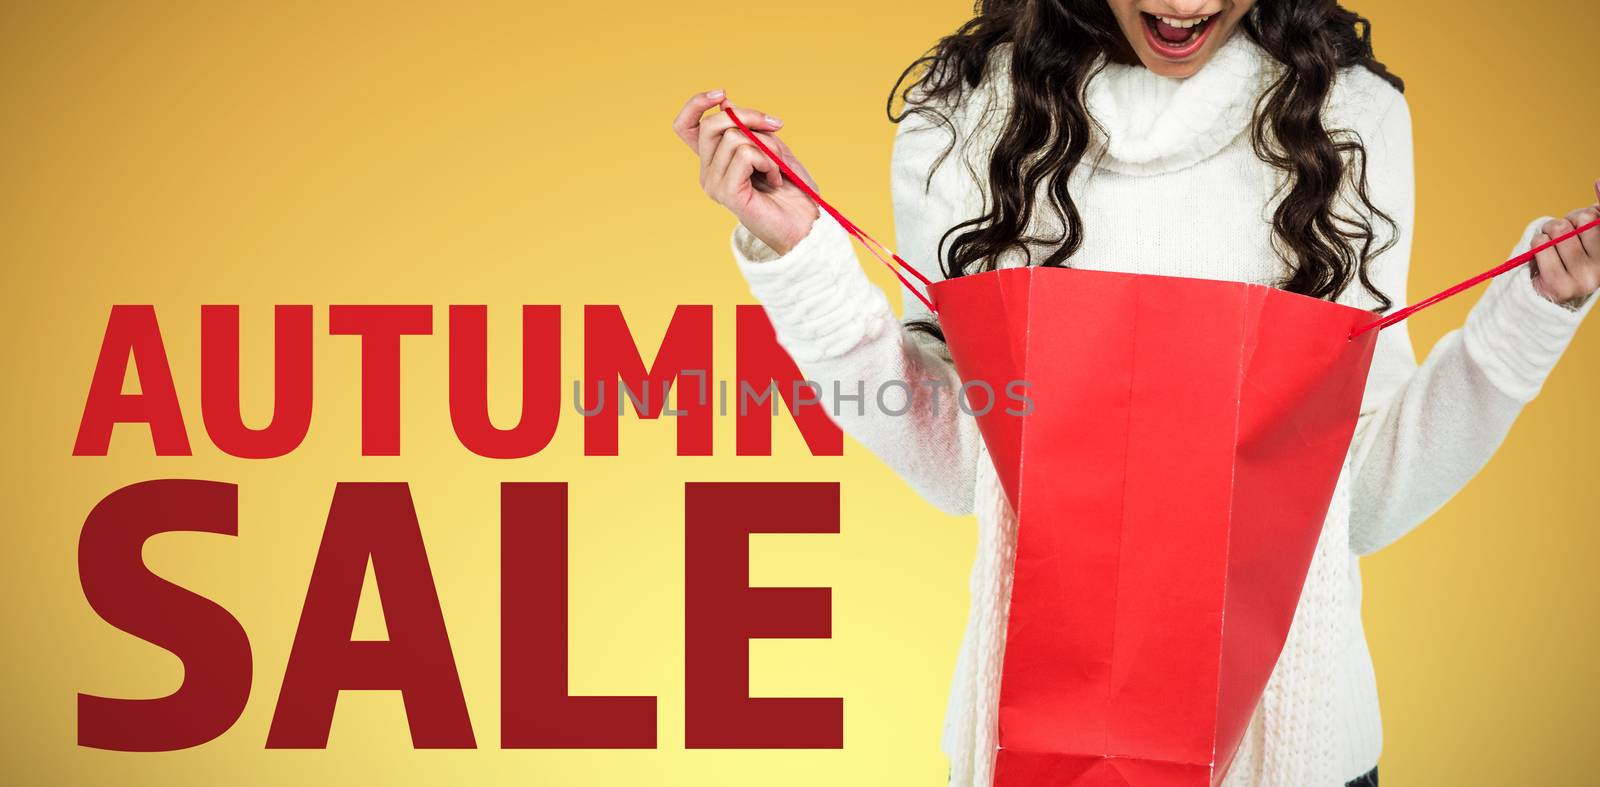 Surprised woman with christmas hat looking in red shopping bag against abstract yellow background